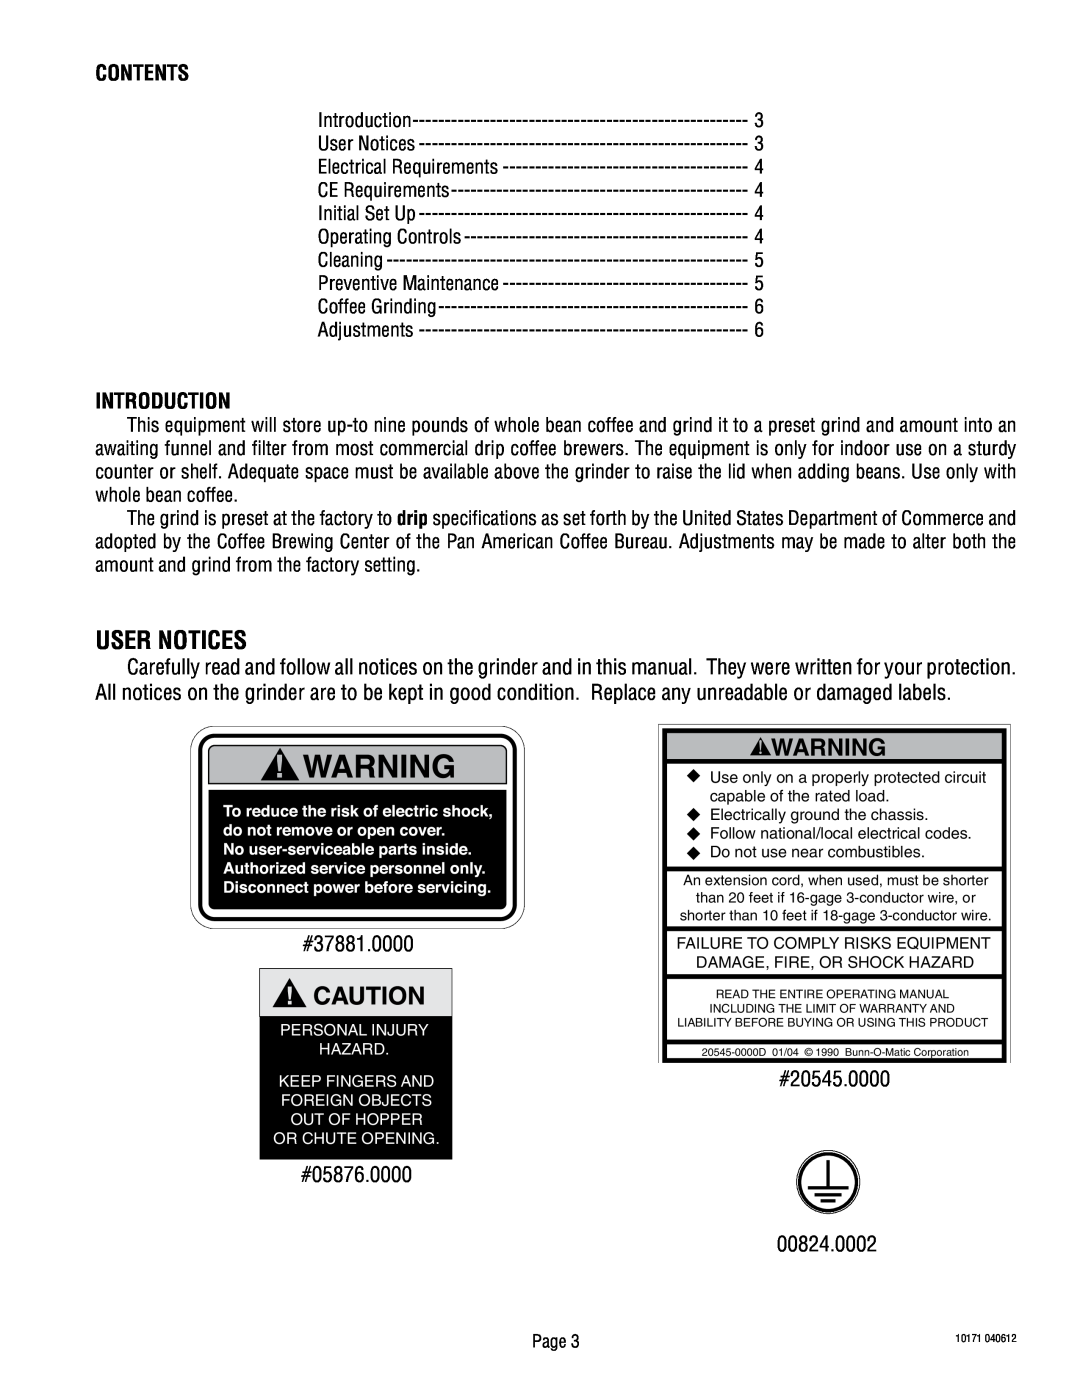 Bunn G9T HD service manual User Notices, Contents, Introduction 